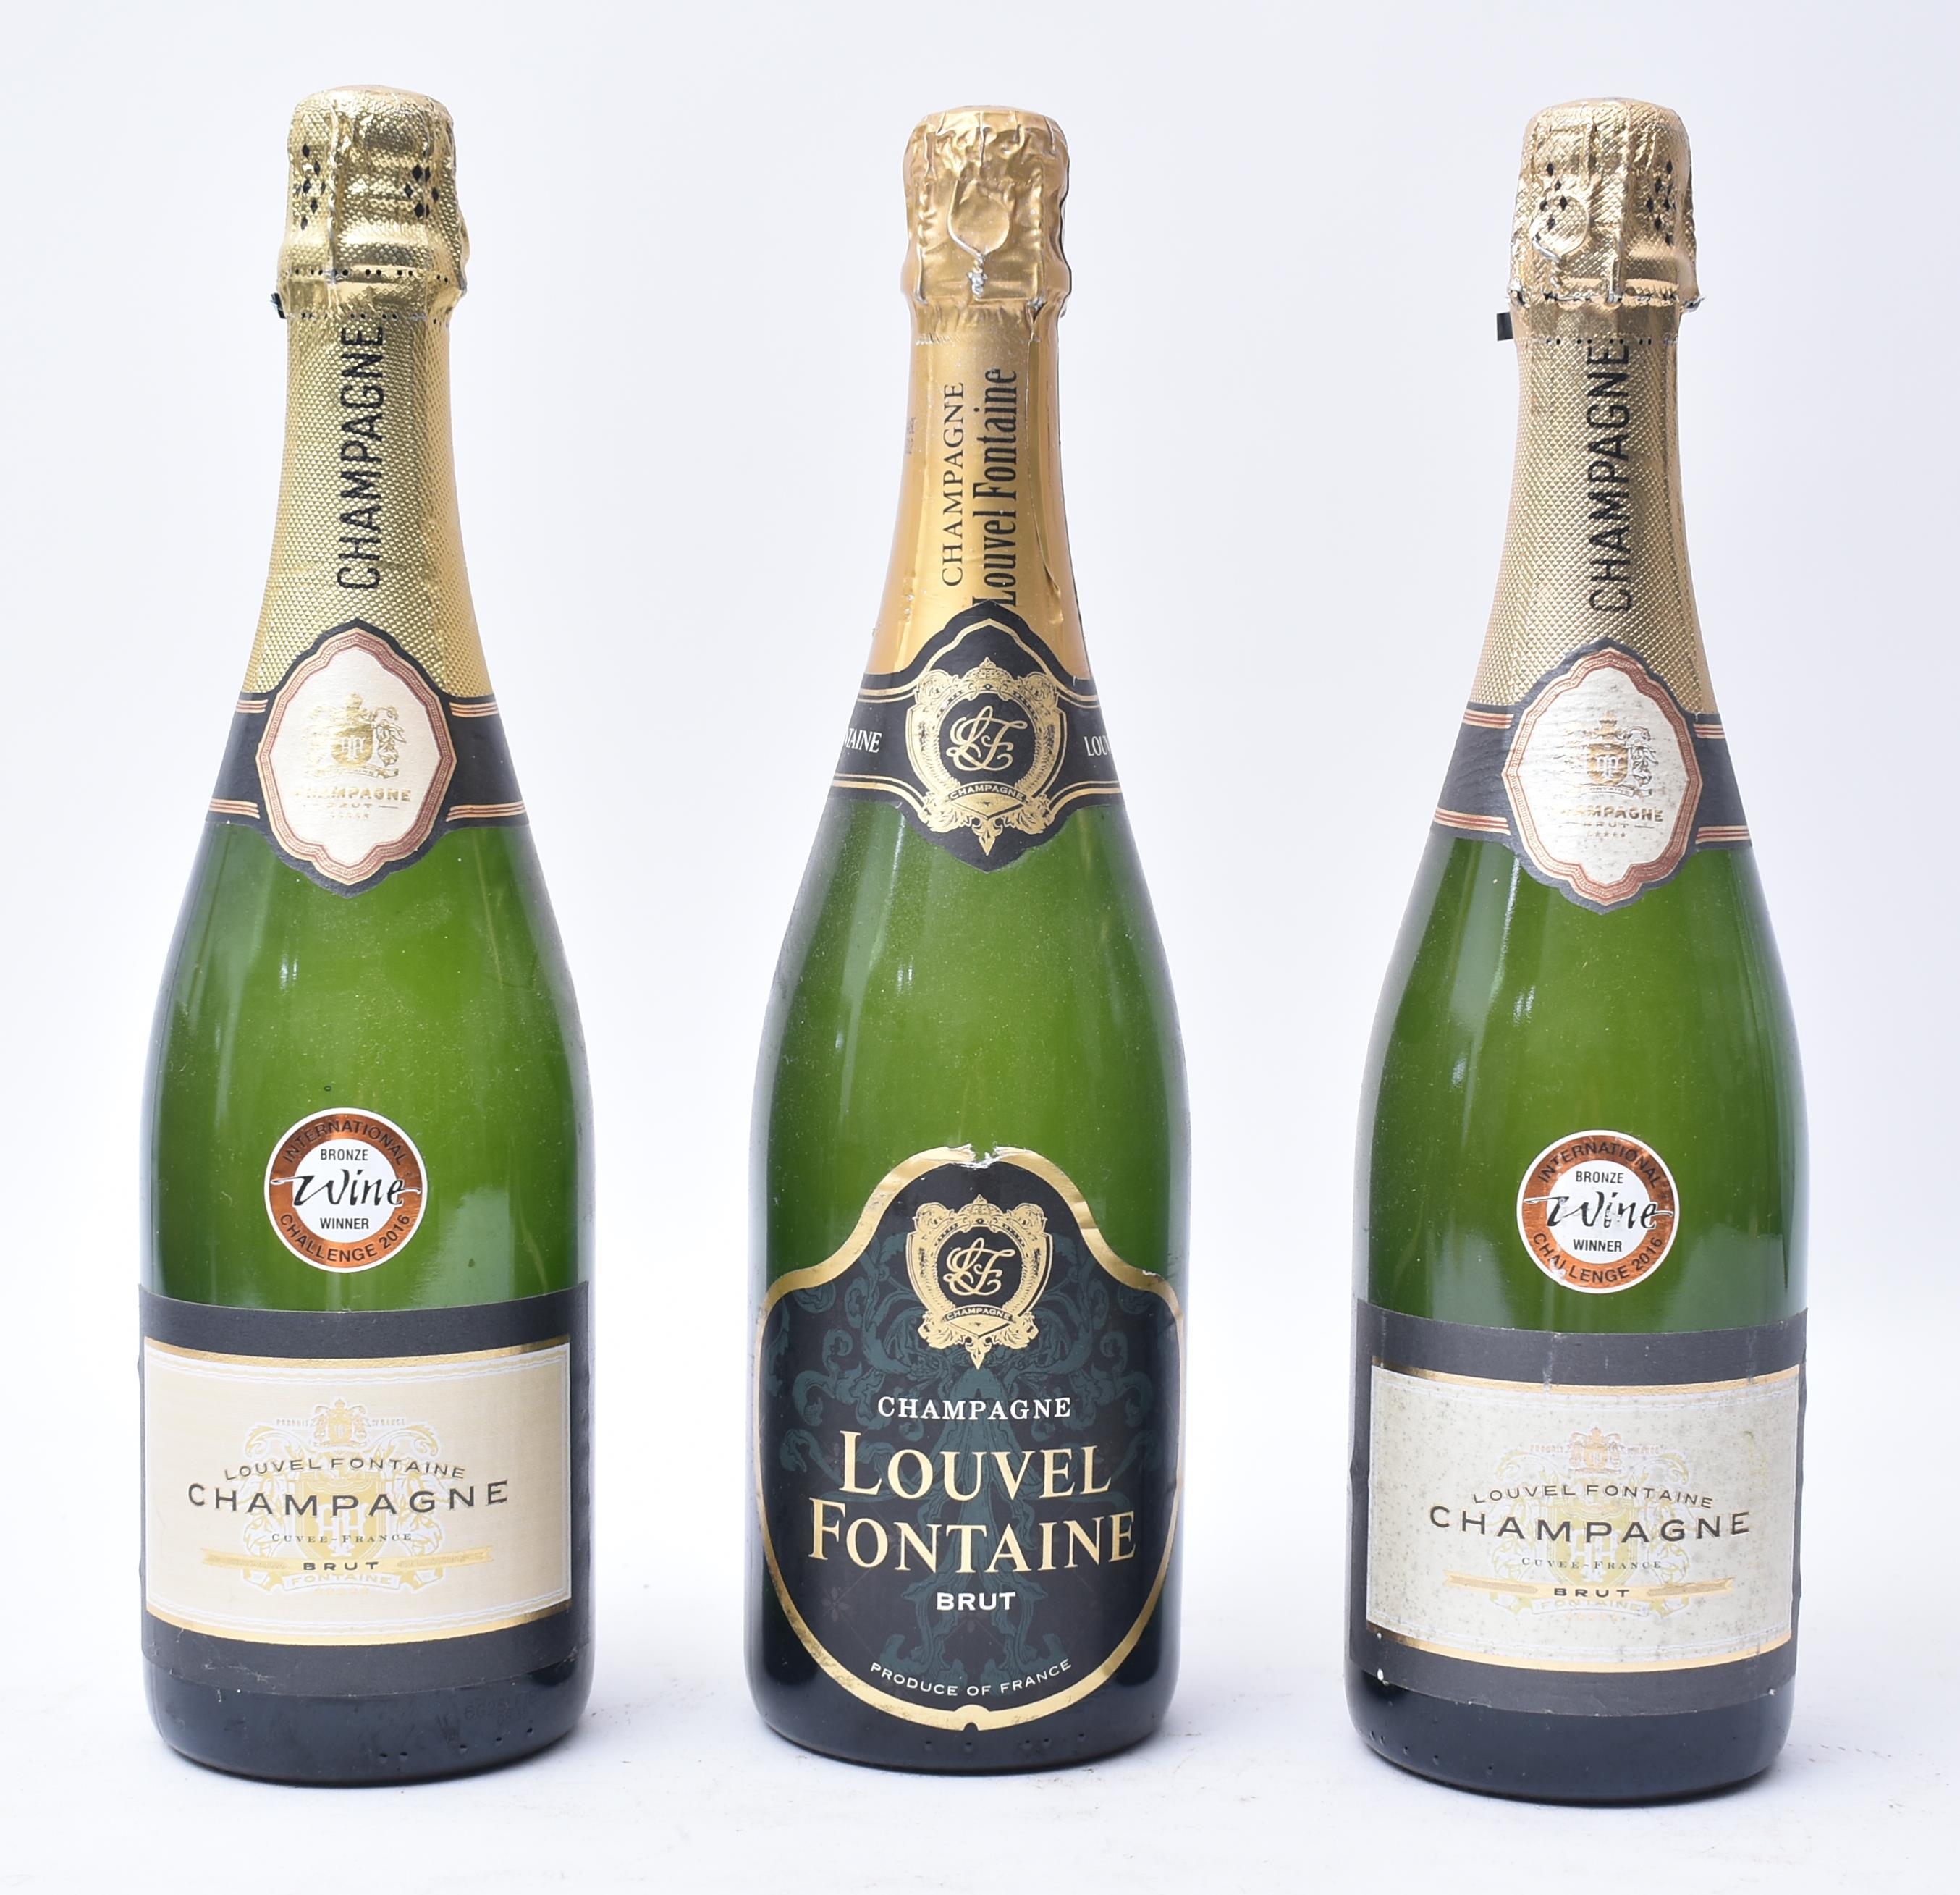 THREE LOUVEL FONTAINE BRUT CHAMPAGNE BOTTLE